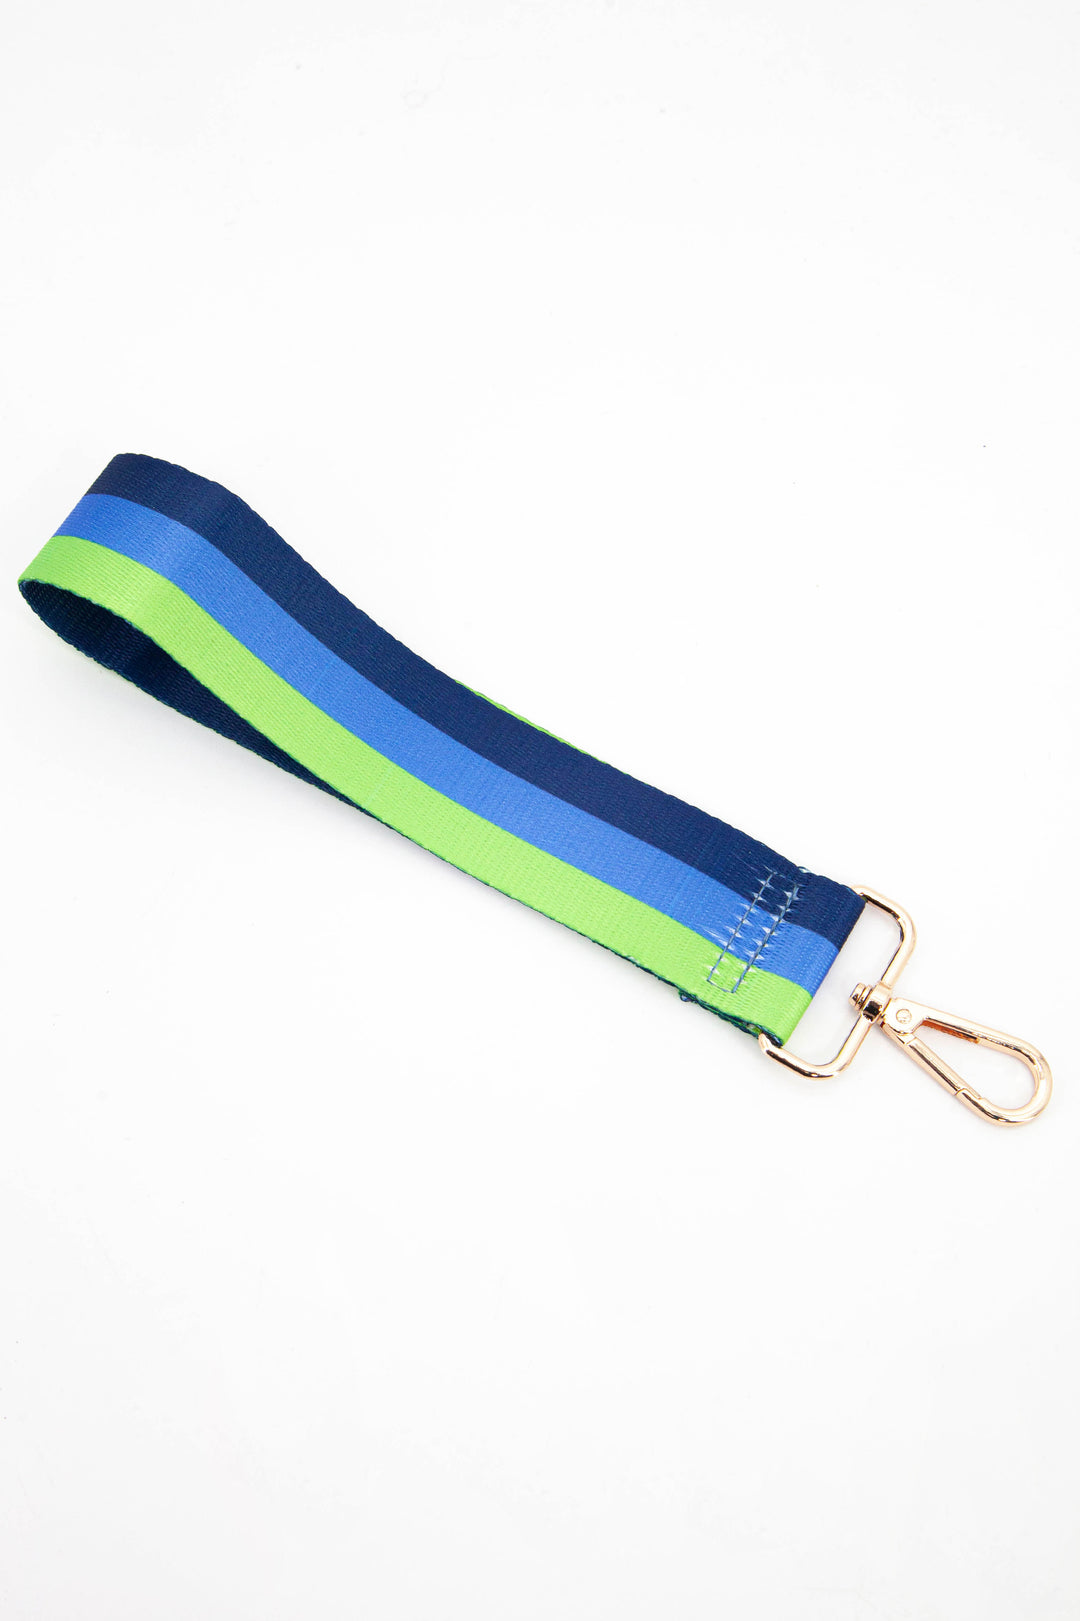 green, blue and navy blue striped wrist strap with gold clip on snap hook